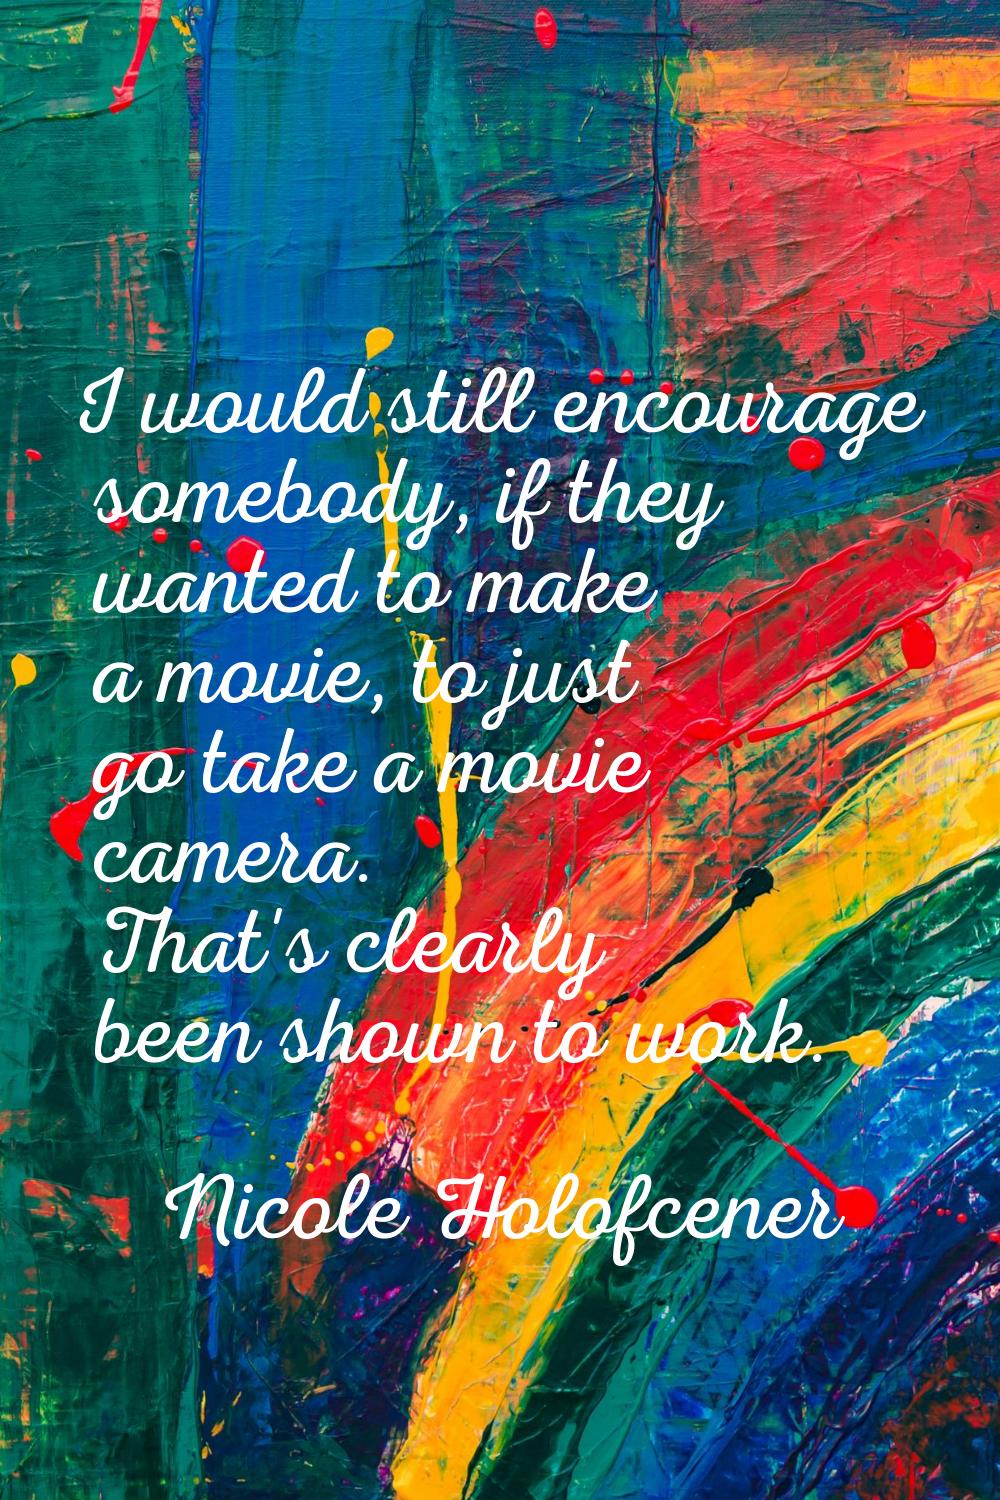 I would still encourage somebody, if they wanted to make a movie, to just go take a movie camera. T